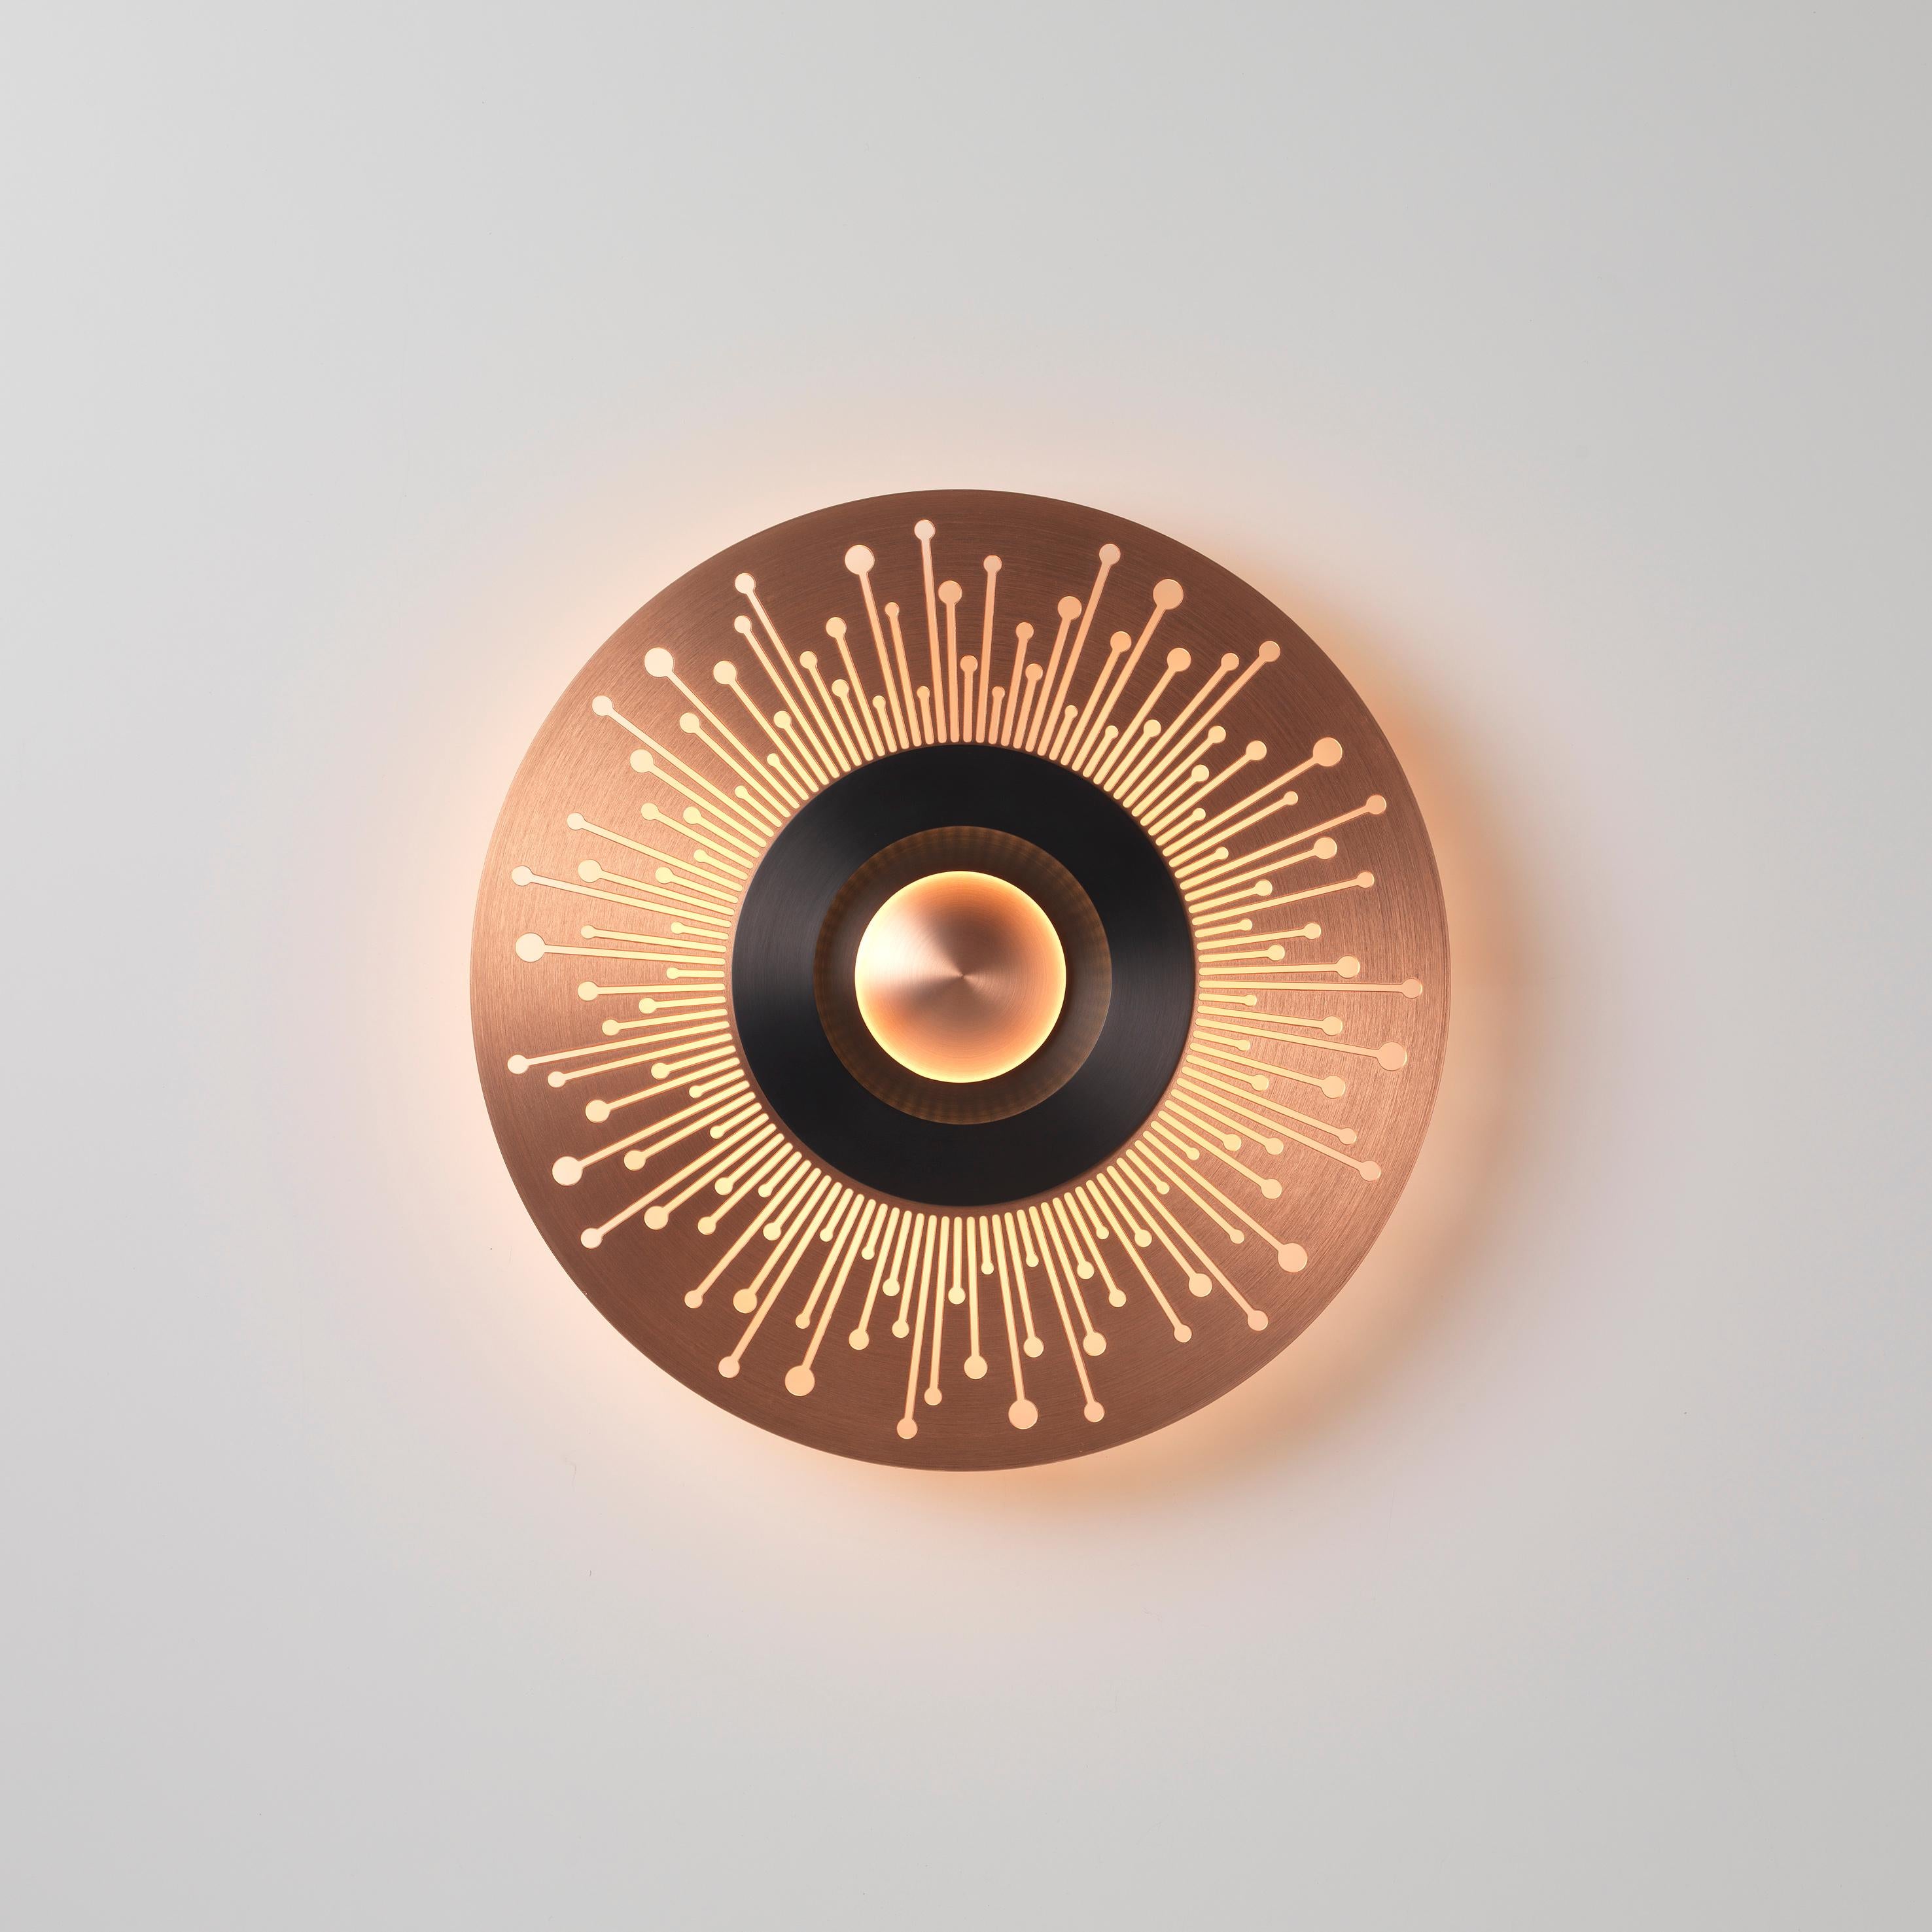 Earth Sun 330 wall light by Emilie Cathelineau
Dimensions: D33 X H5 cm
Materials: Solid brass,Polycarbonate diffuser.
Others finishes and dimensions are available.

All our lamps can be wired according to each country. If sold to the USA it